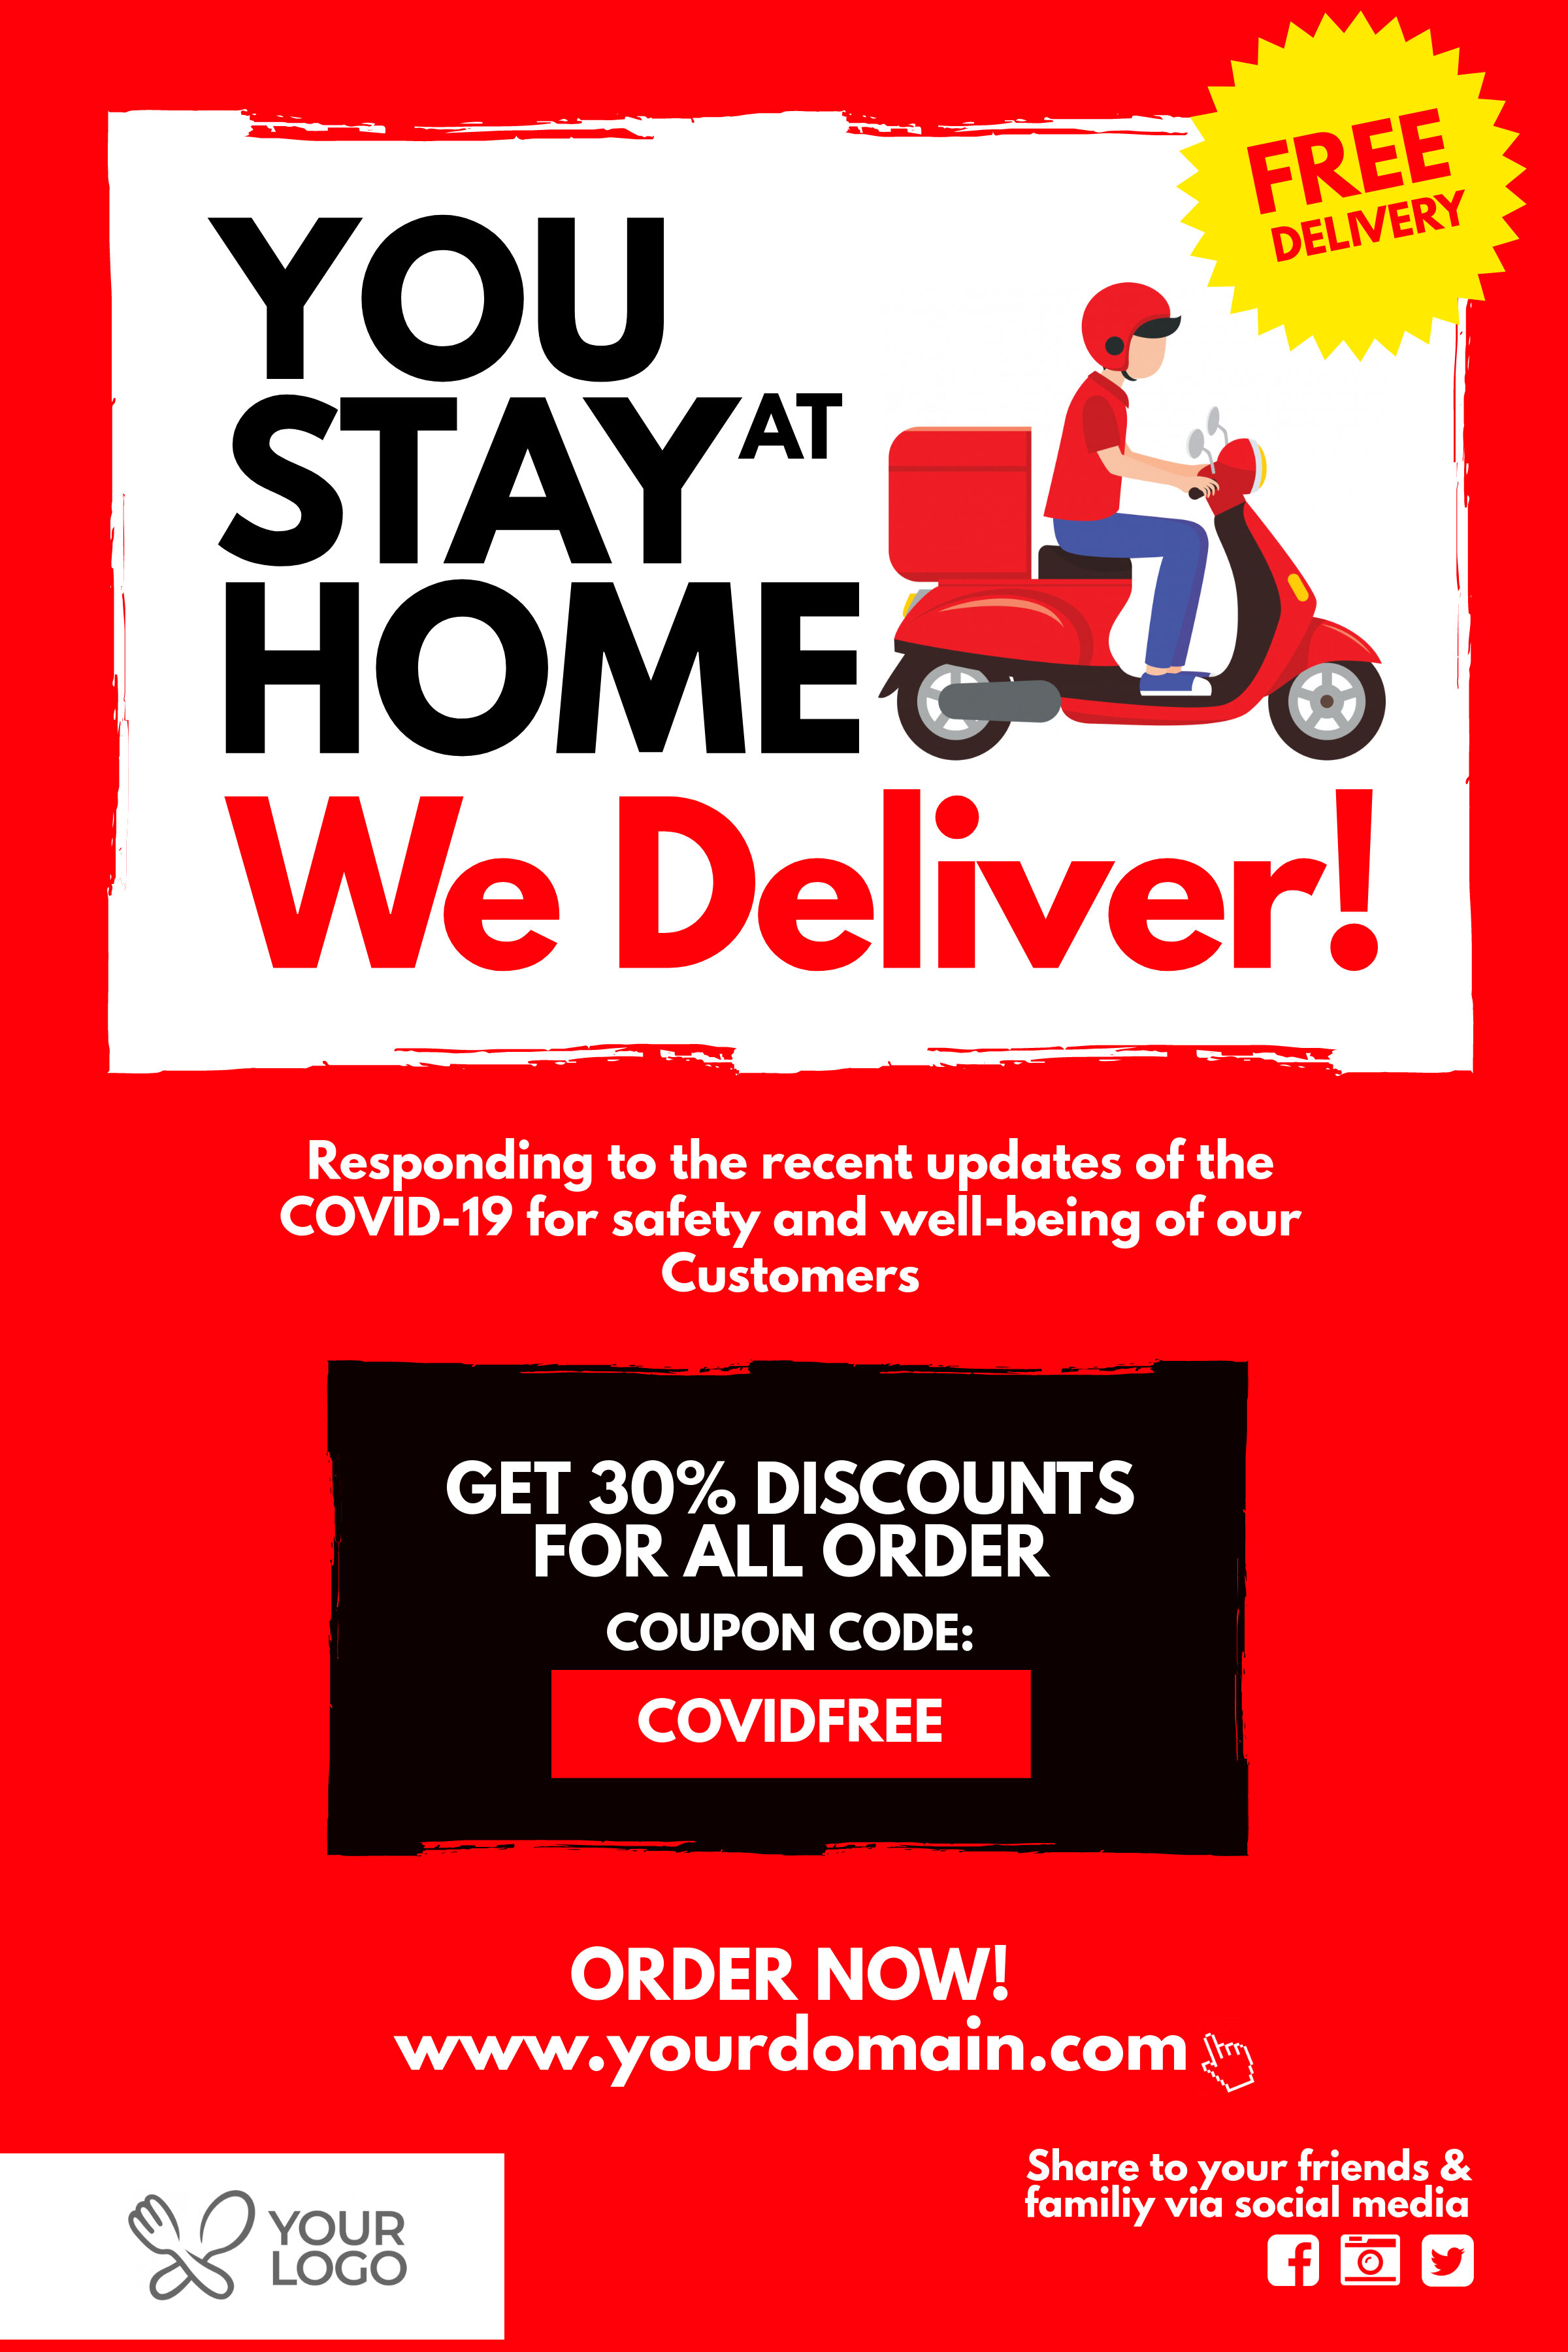 Copy of Covid-19 Food delivery Take Away Poster.jpg